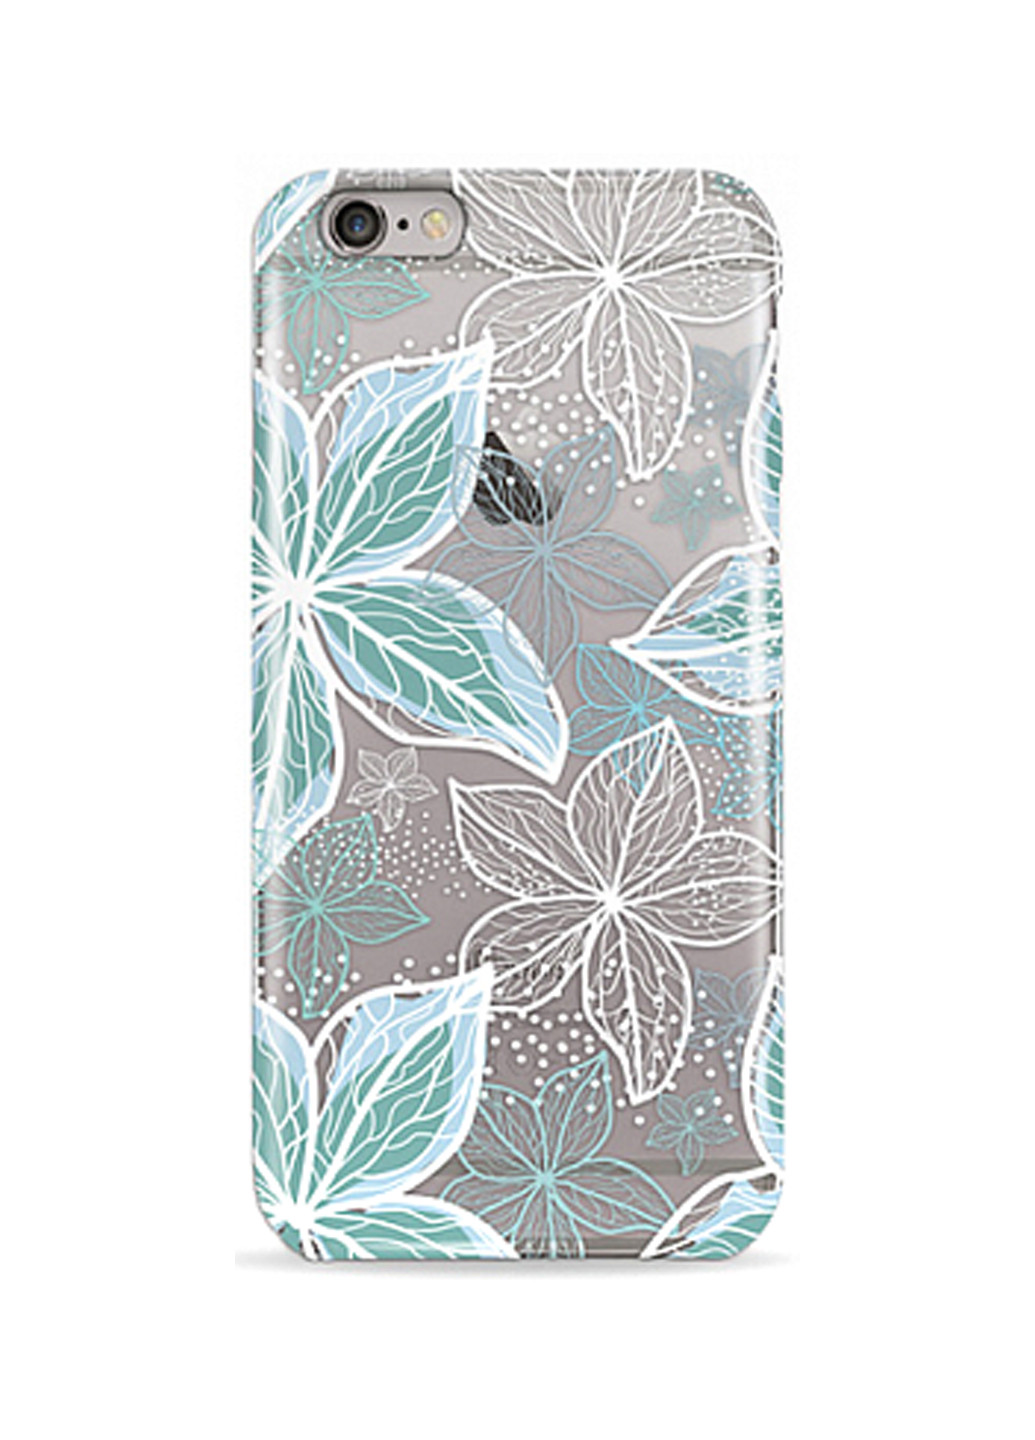 Чохол Transperency Case for iPhone 6 / 6S Blue Flowers Pump transperency case для iphone 6/6s blue flowers (136993731)